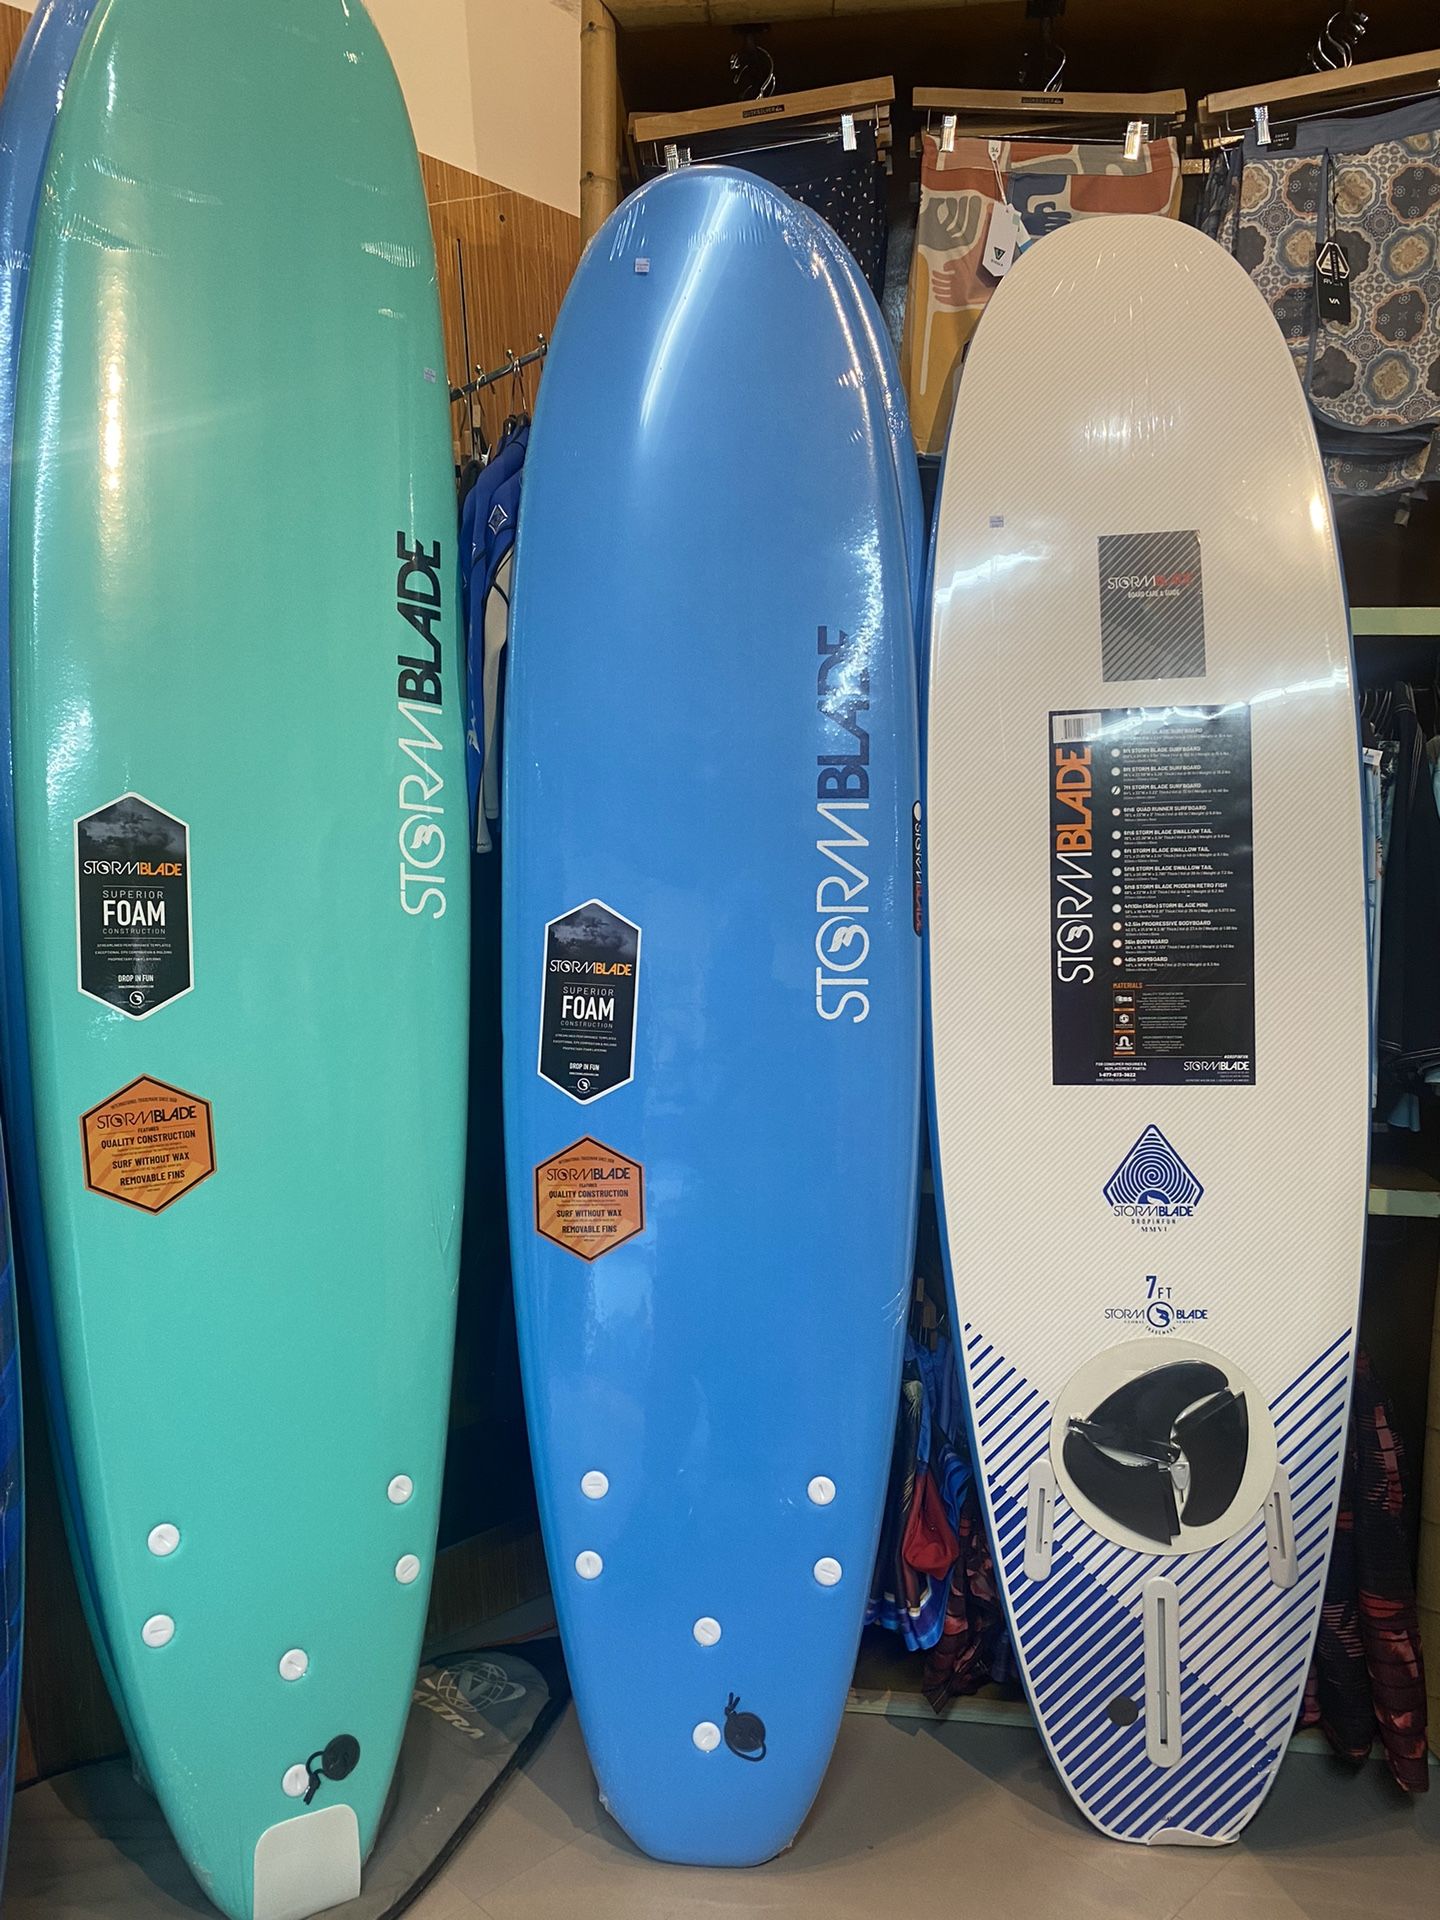 6, 7 & 8 Foot Soft Top Foam Surfboards At Catch A Wave Surf Shop